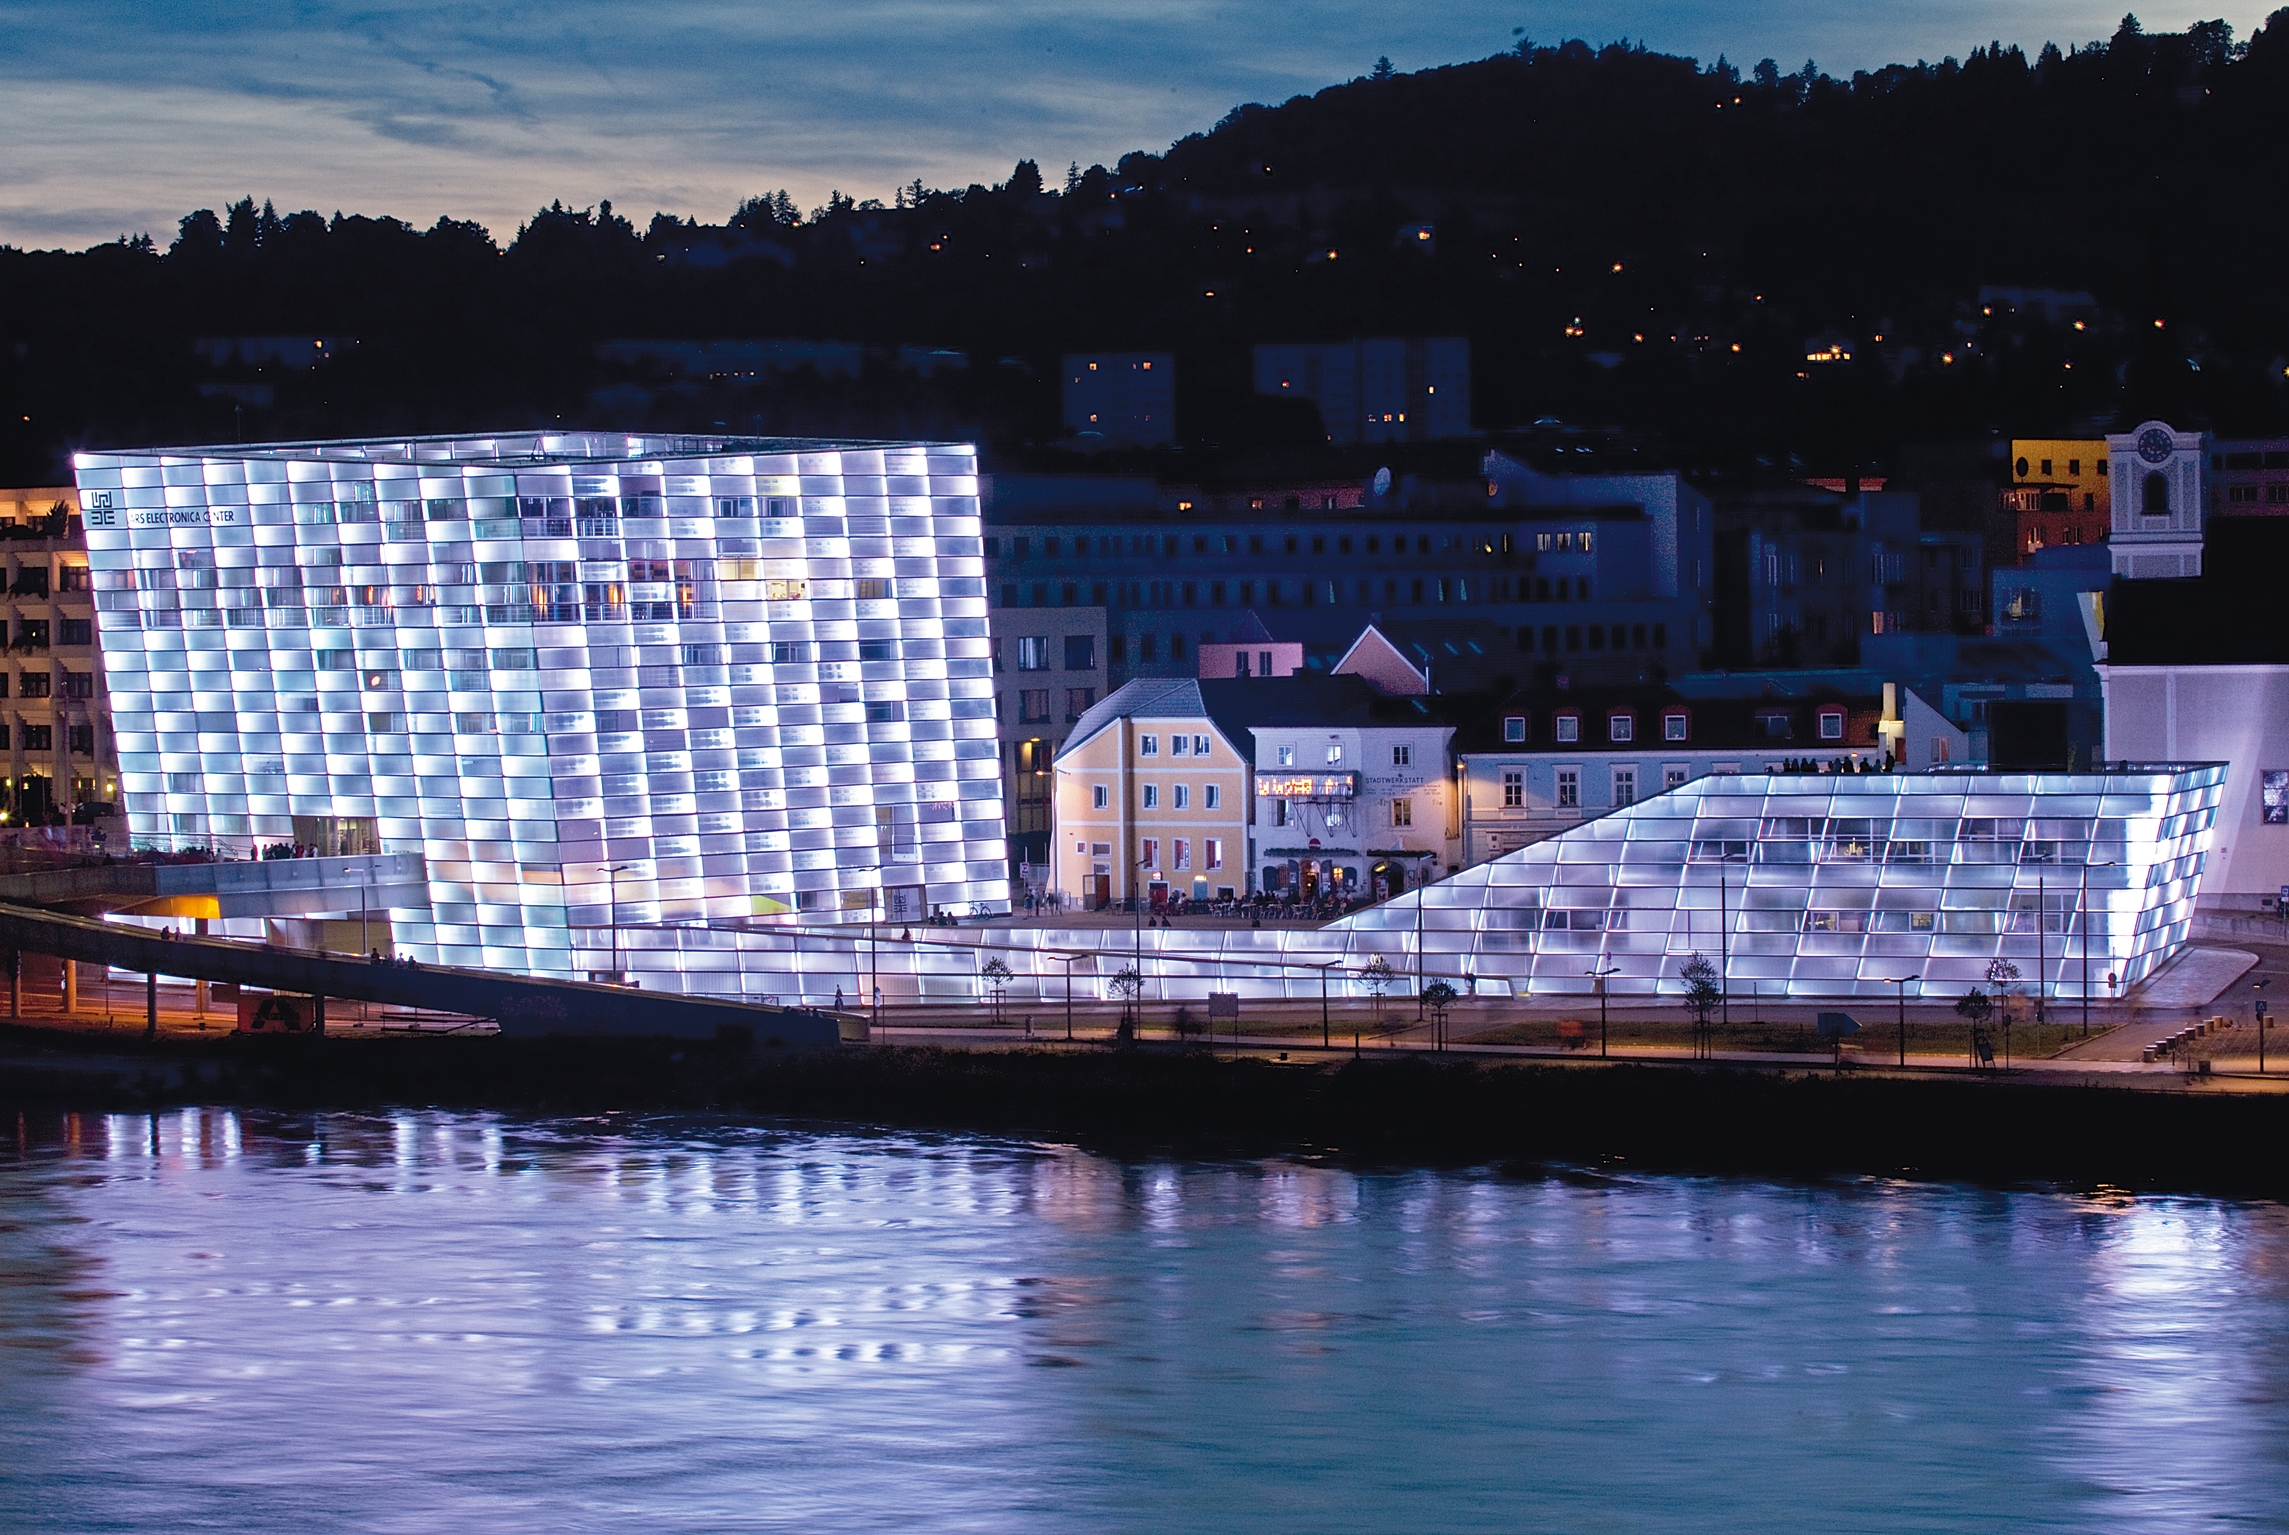 Martin Honzik leaves Ars Electronica – Veronika Liebl continues to manage the “Festival-Prix-Exhibitions” division